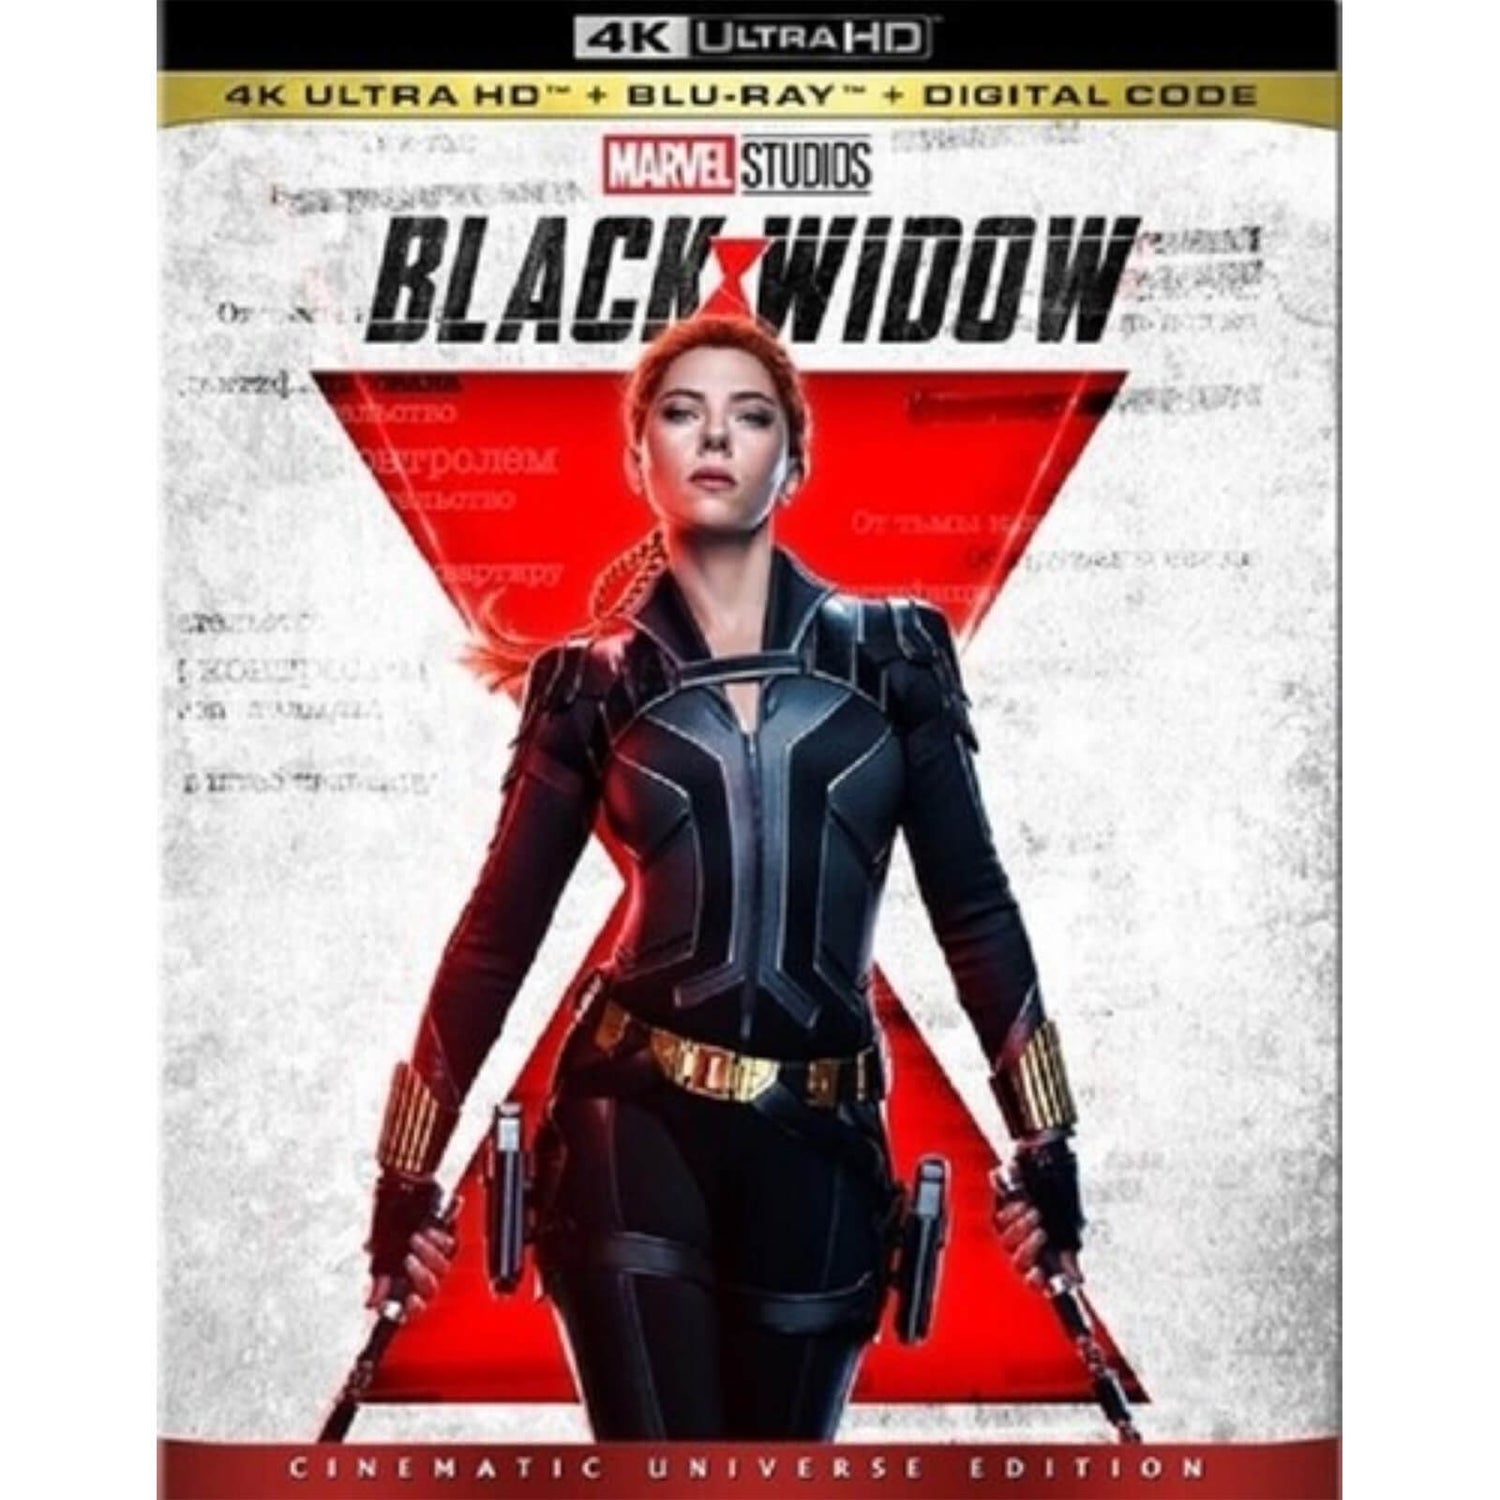 Black Widow: Ultimate Collector's Edition - 4K Ultra HD (Includes Blu-ray) (US Import)